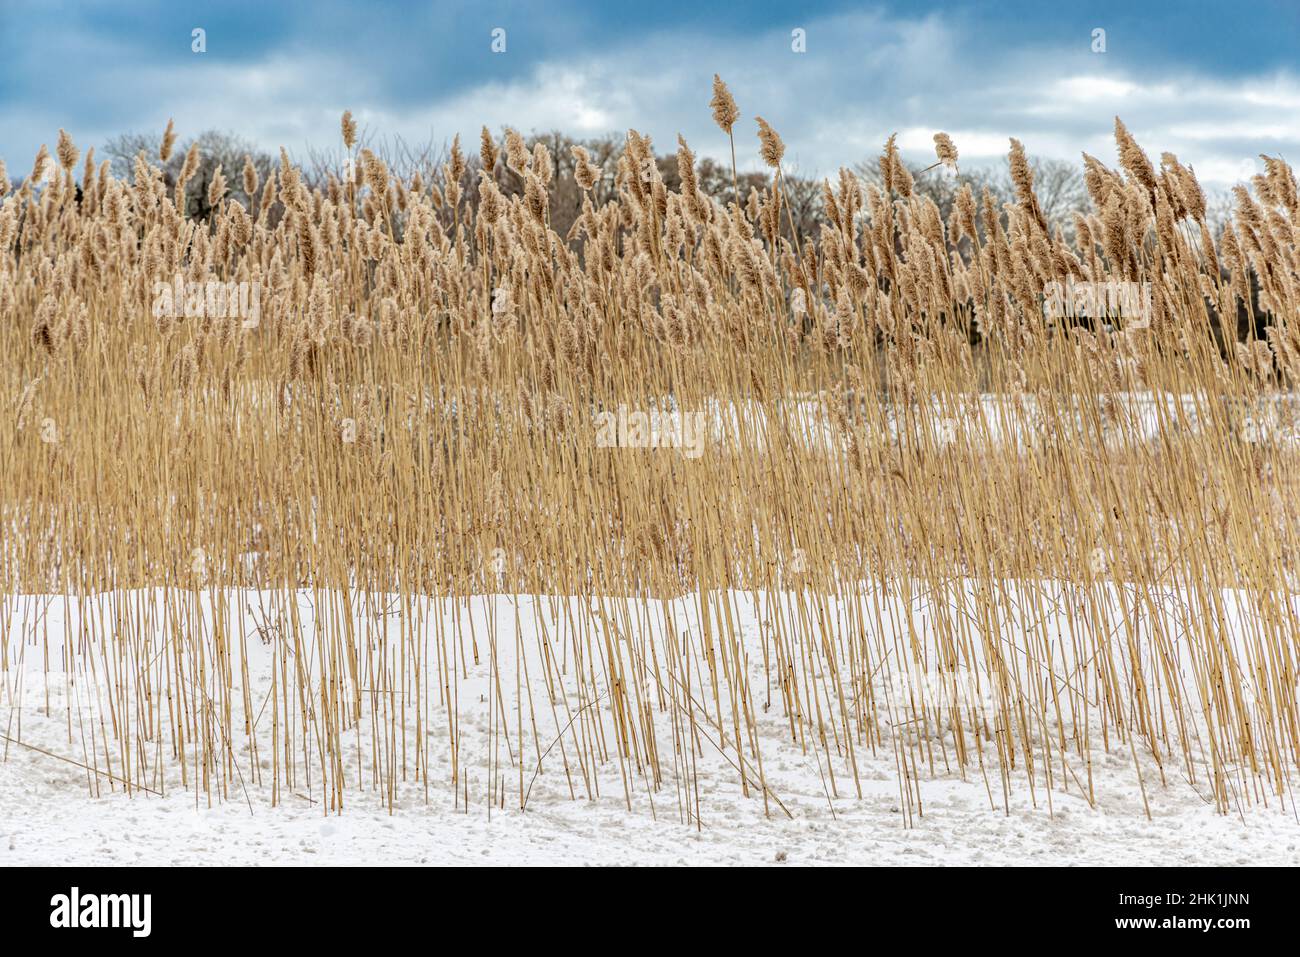 Dried brown beach grass in the snow Stock Photo